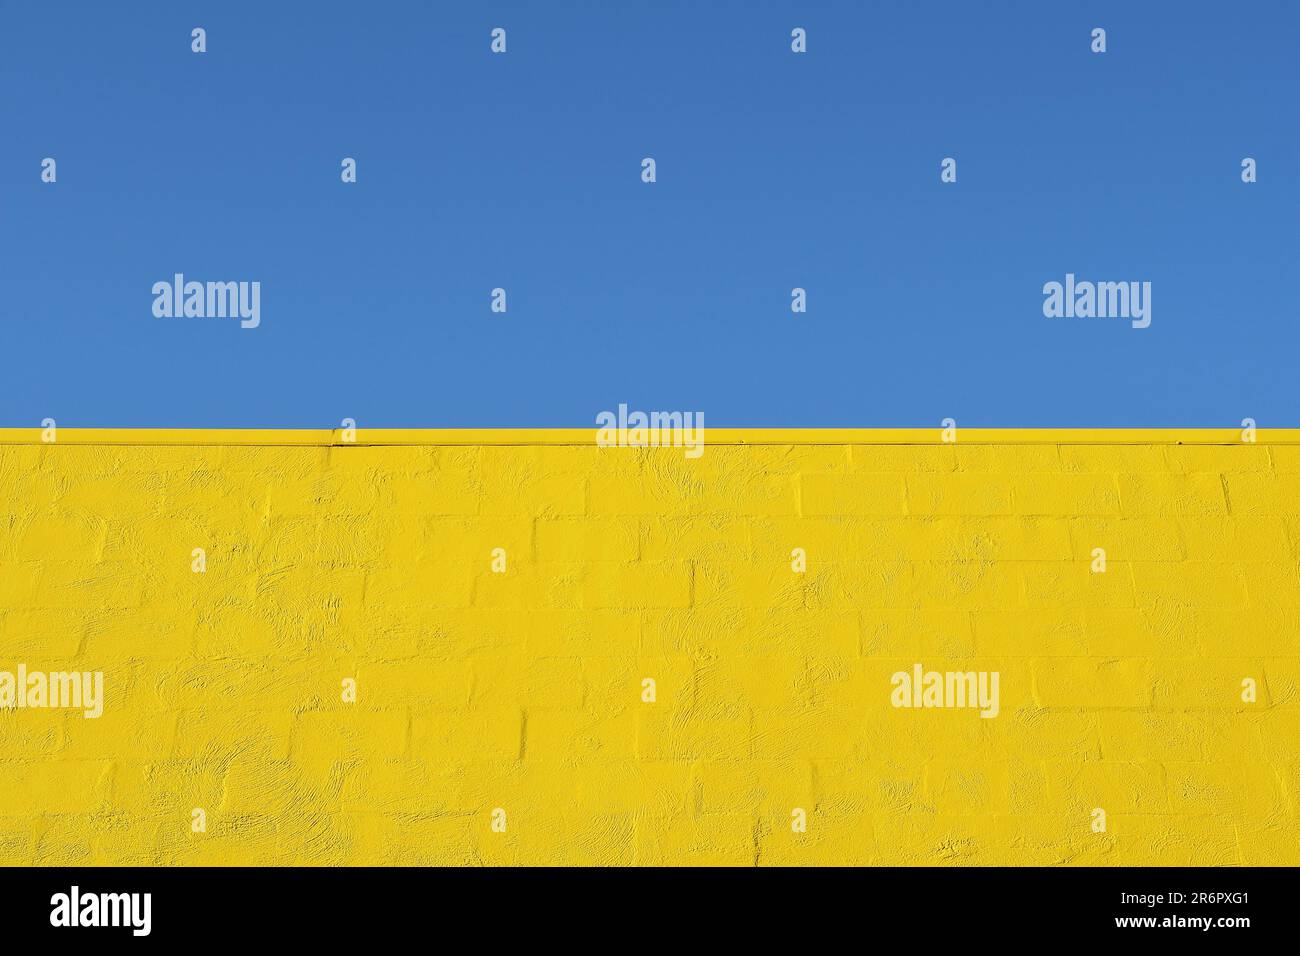 A blue sky and a strong yellow brick wall in the design of the Ukrainian flag to symbolise the strength and resilience of the Ukrainian people Stock Photo